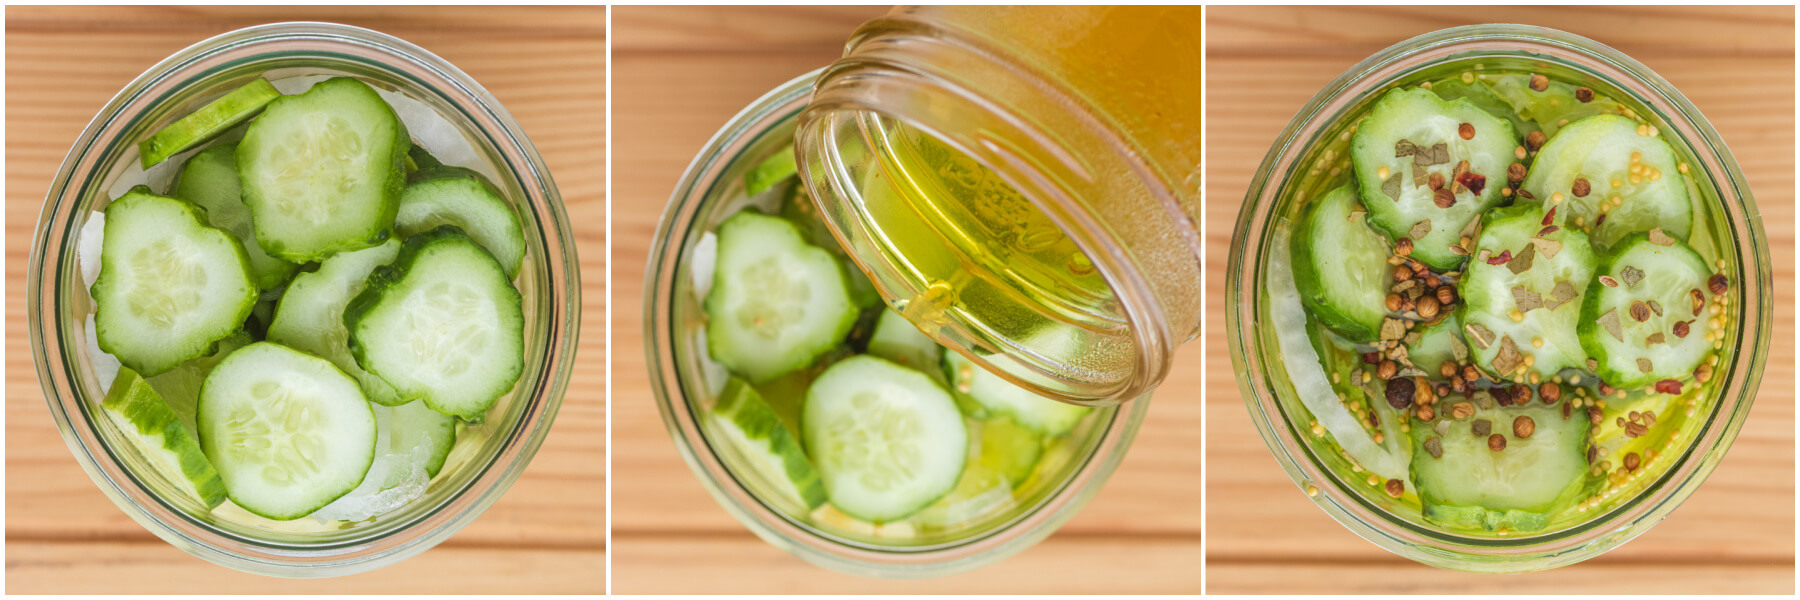 Process image series showing the addition of brine and pickling spices to a jar of sliced cucumbers and onions.